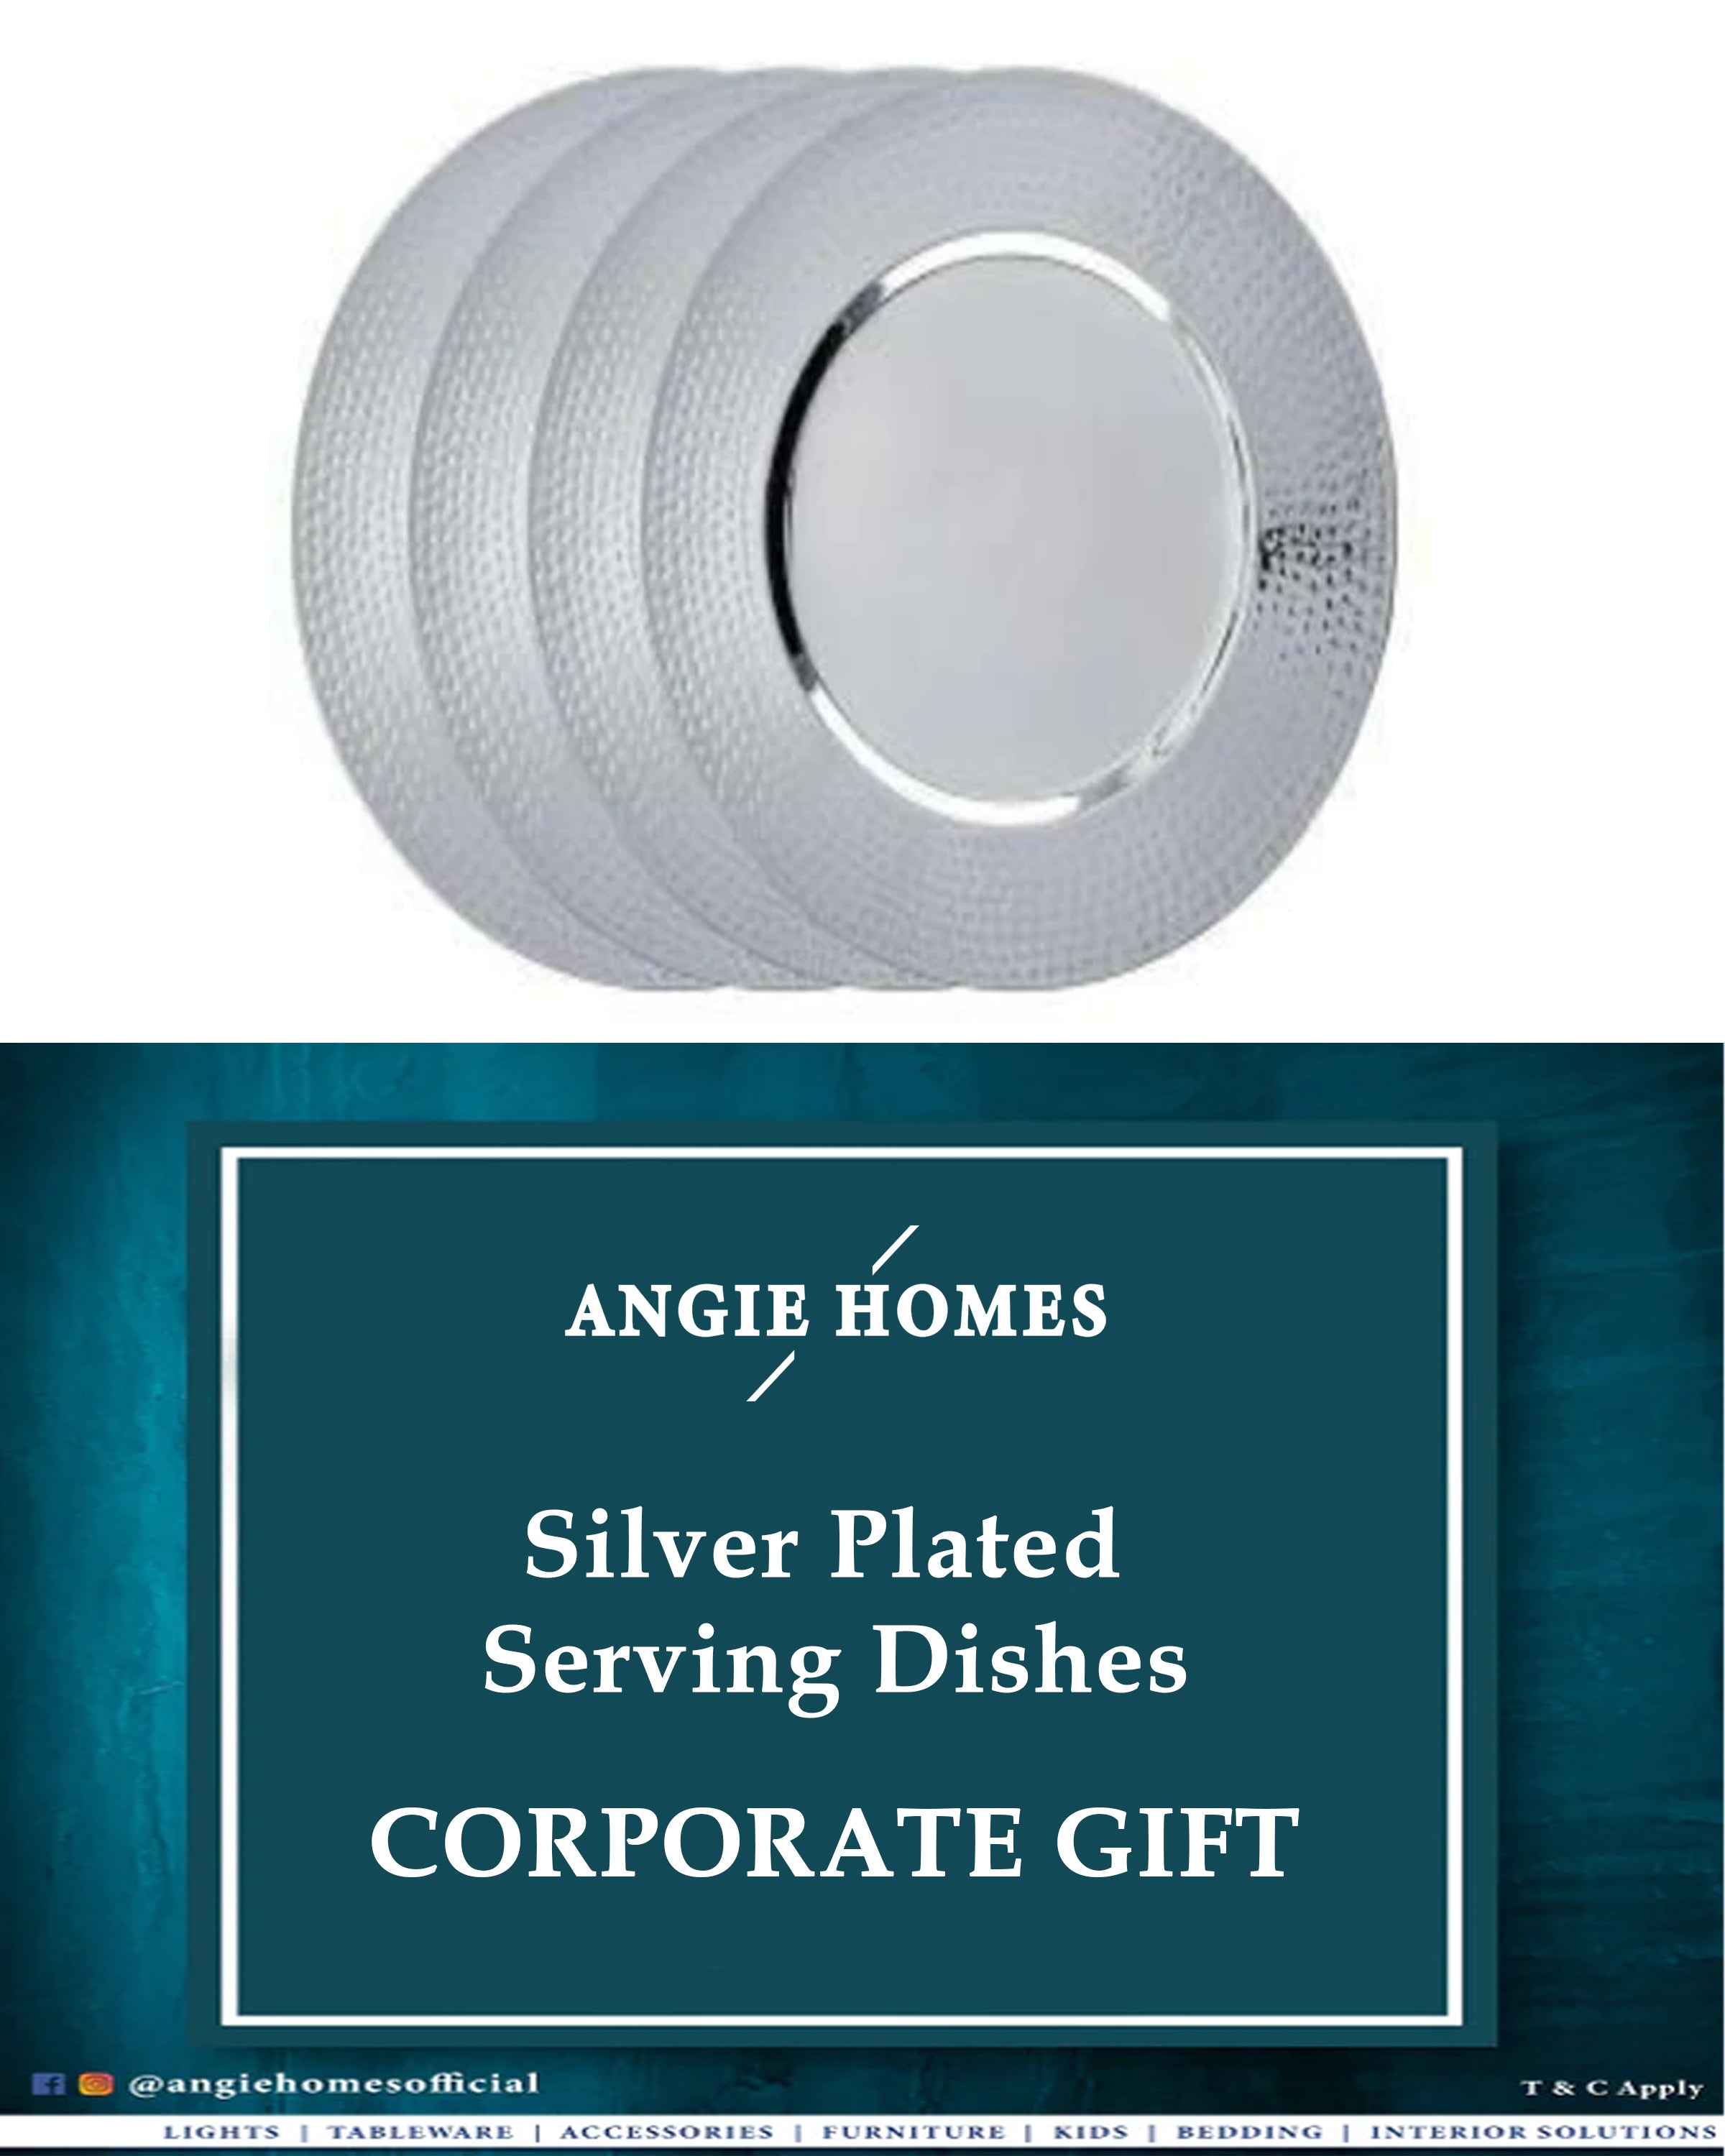 Silver Plated Serving Dishes for Wedding, House Warming & Corporate Gift ANGIE HOMES